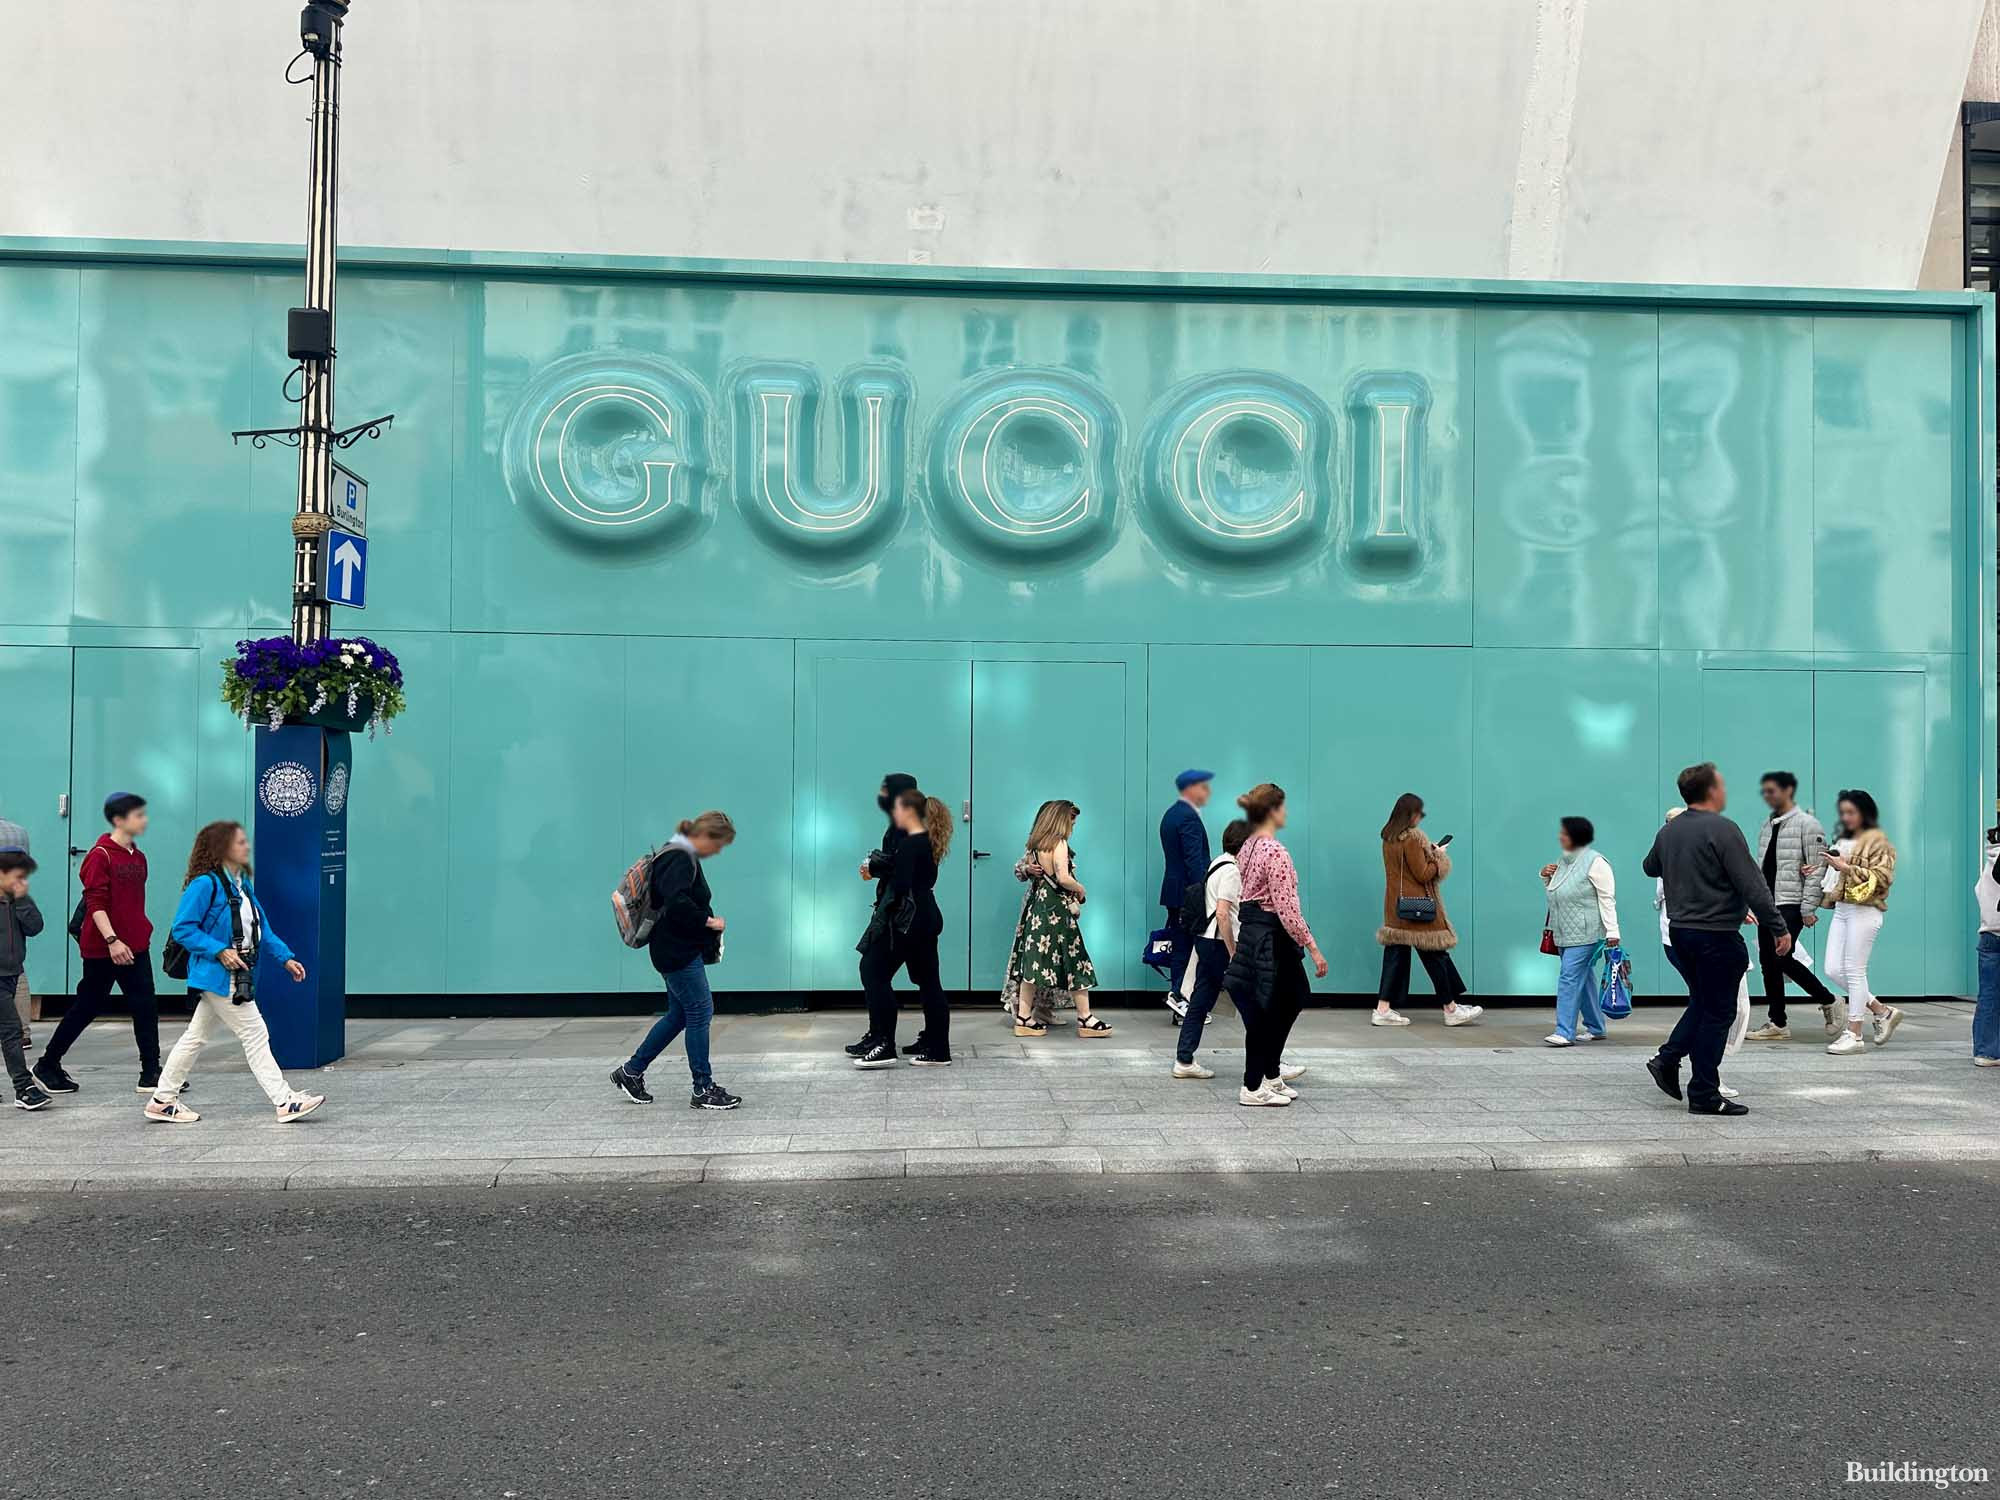 Gucci is preparing to open at 144-146 New Bond Street in Mayfair, London W1.